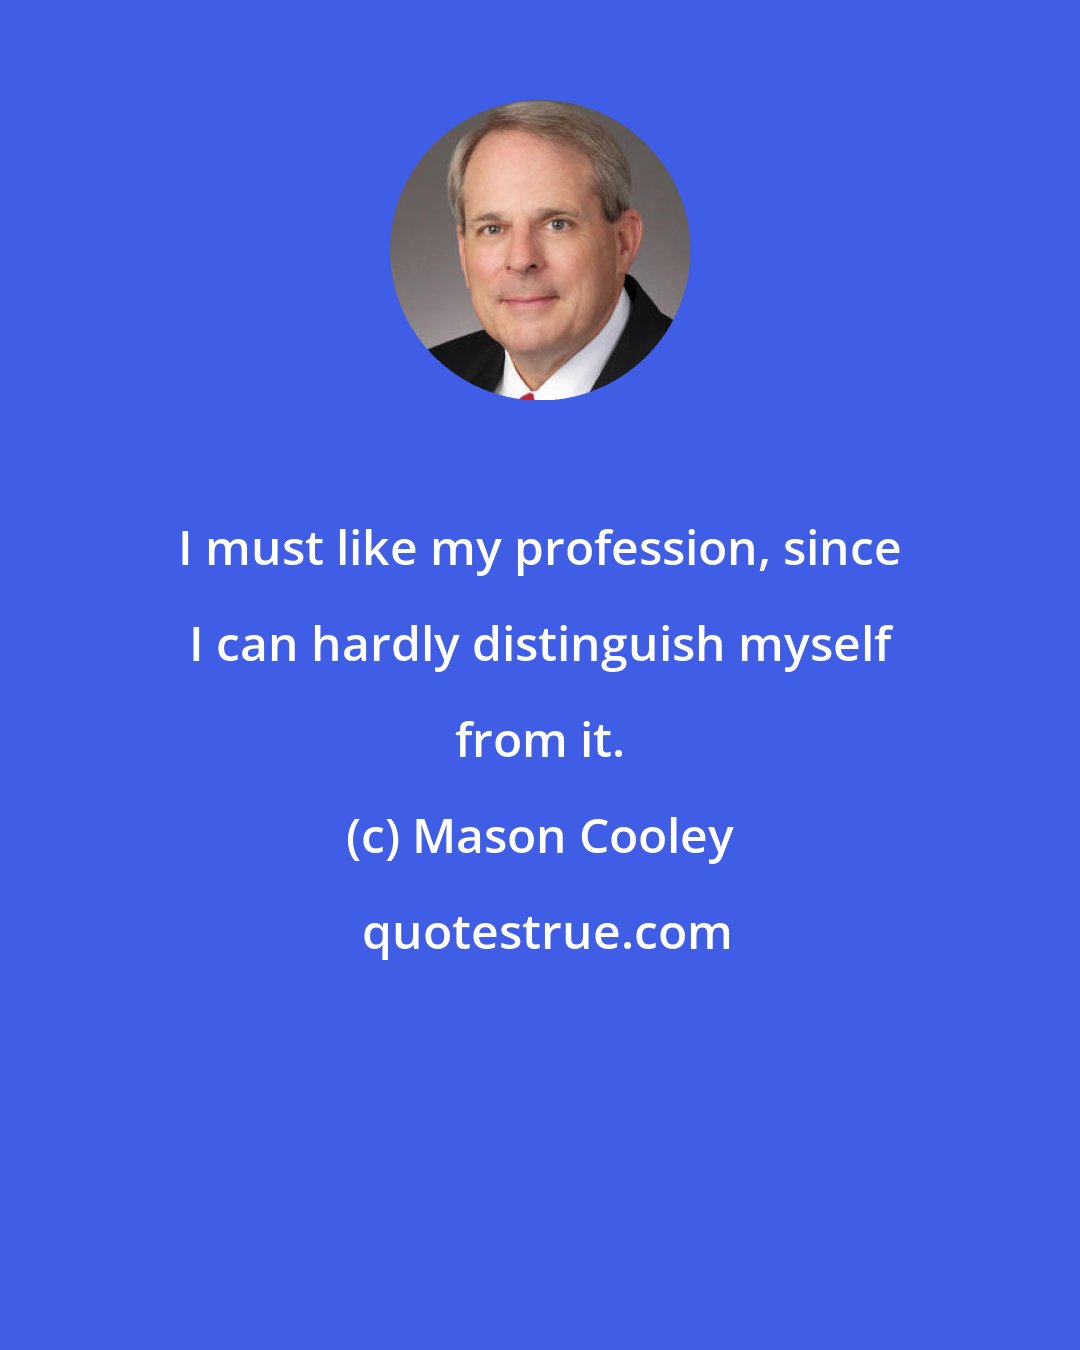 Mason Cooley: I must like my profession, since I can hardly distinguish myself from it.